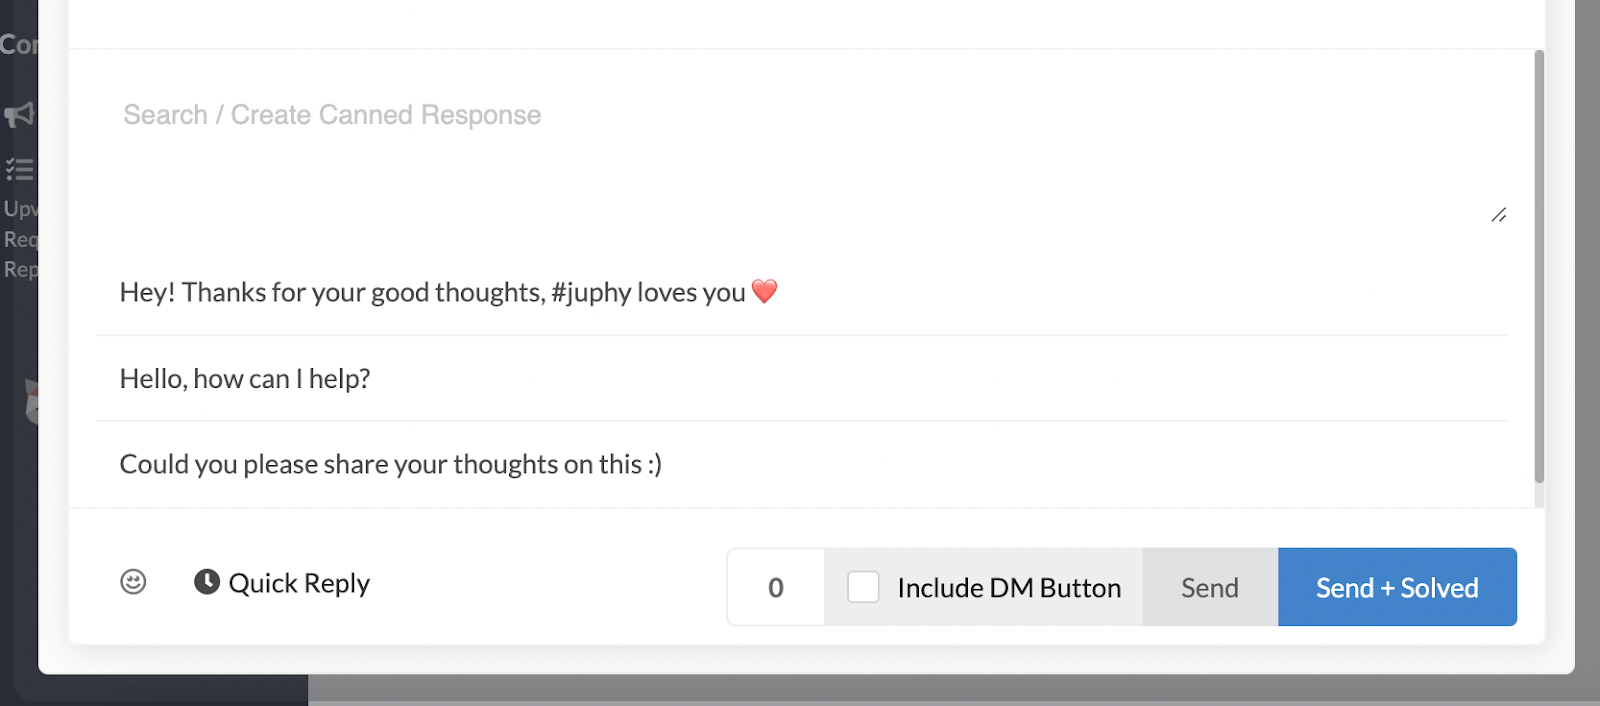 Juphy’s canned responses enable you to provide quick replies to your customers.